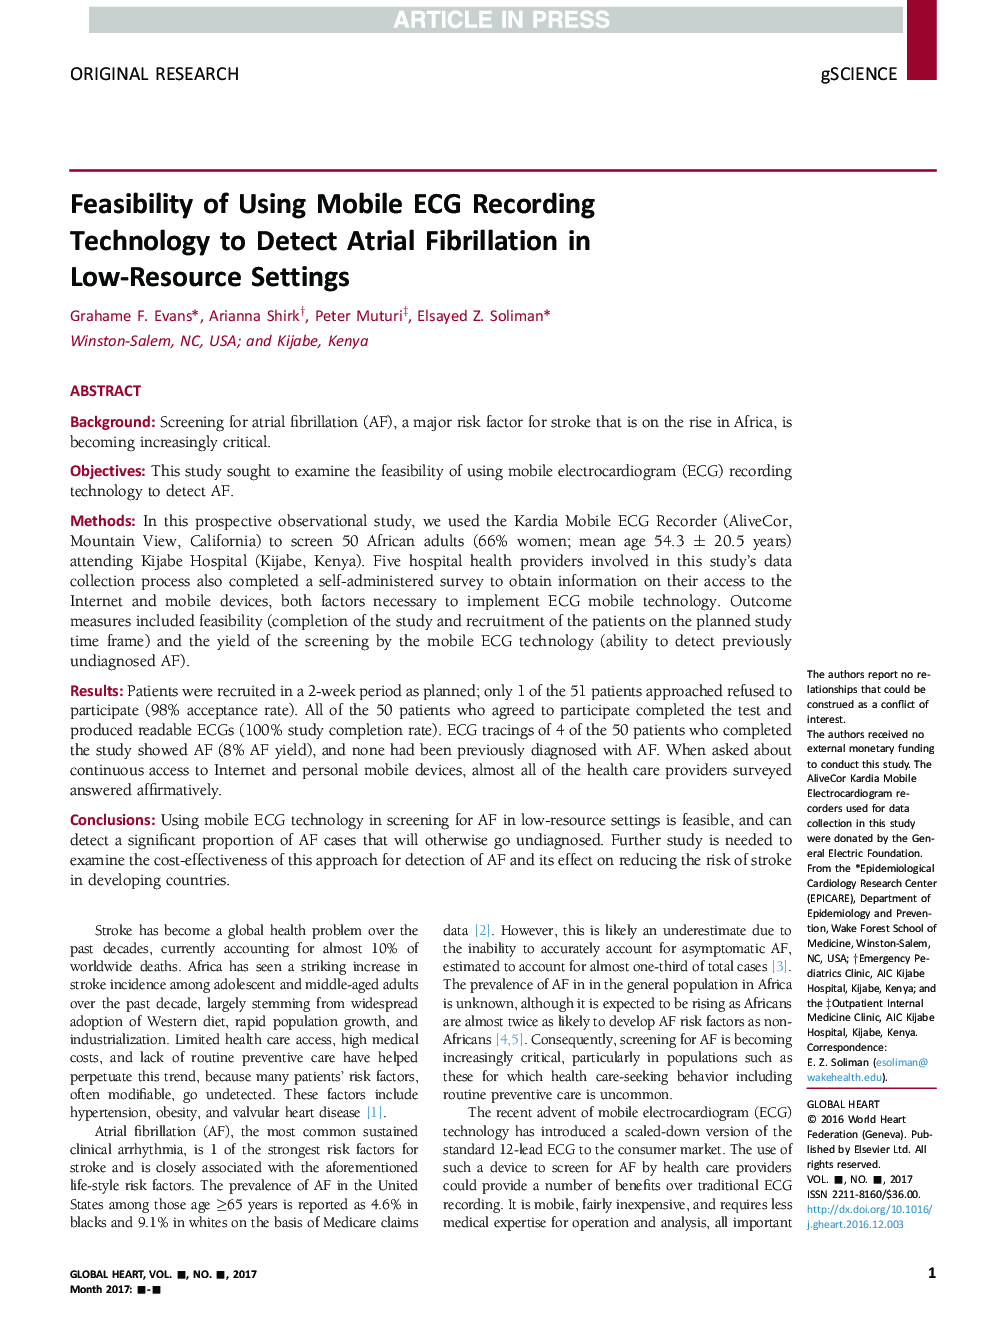 Feasibility of Using Mobile ECG Recording Technology to Detect Atrial Fibrillation in Low-Resource Settings